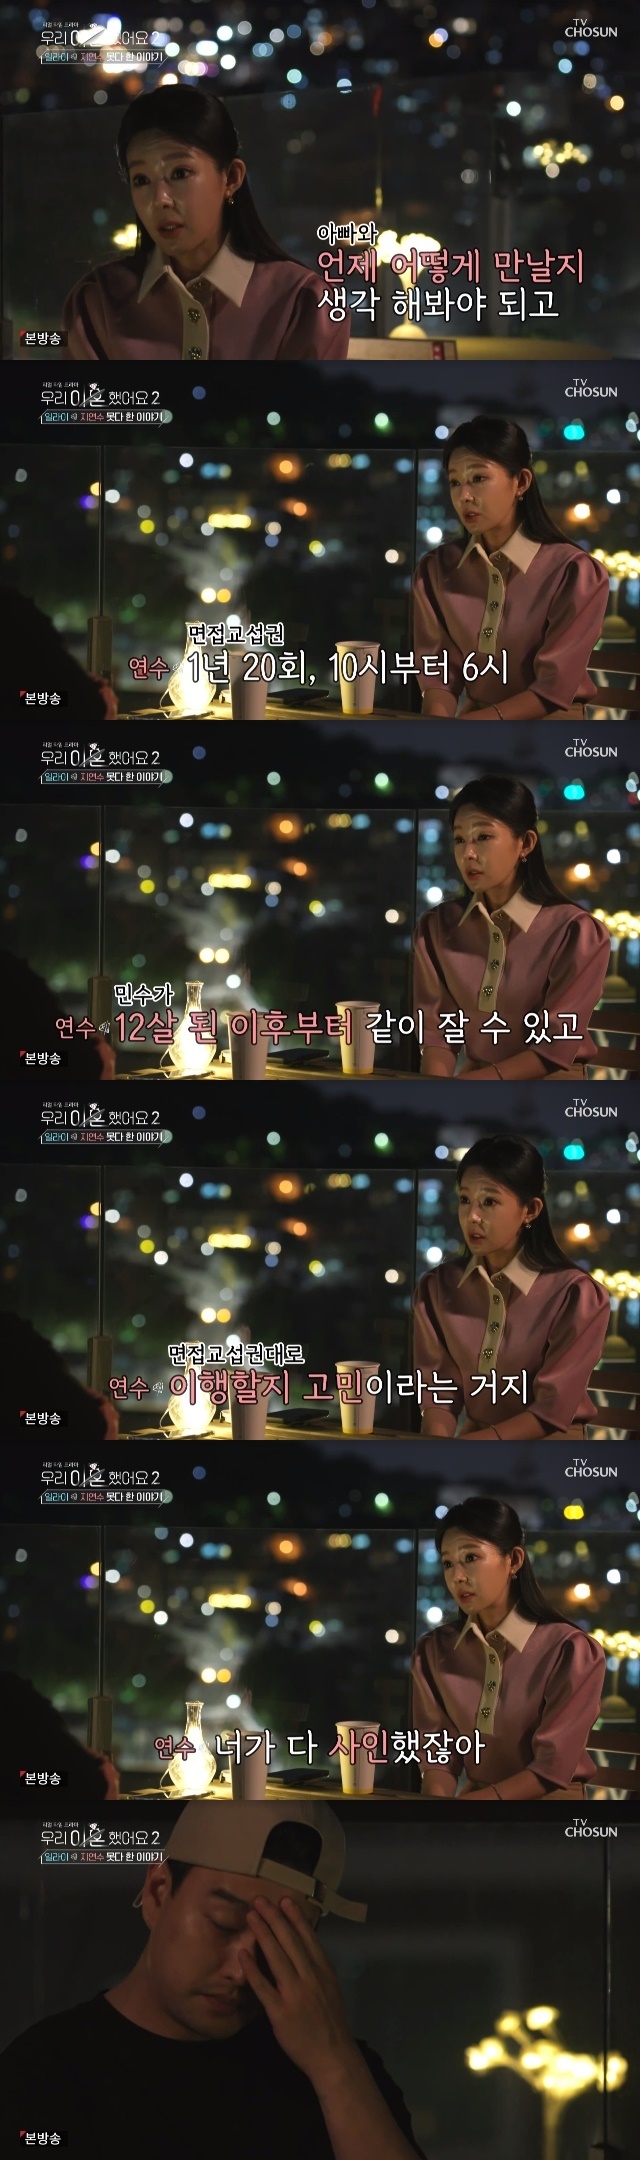 Ji Yeon-soo made tensions by mentioning contact with Minsu to Eli, who decided to become independent.In the 11th episode of the TV Chosun entertainment We Divorced 2 (hereinafter referred to as We Got Divorced), which was broadcast on June 24, Eli and Ji Yeon-soo, who were talking alone after Elis independence notice, were portrayed.Ji Yeon-soo, who was informed by Eli that he would leave the house after going to the United States on the day, expressed his concern about his son Minsu. Eli said, At first you will hate me.But the more I grow up, the more I will do to make sure that Father has done these Choices. Ji Yeon-soo said, Once you came to Korea and decided to live, it is time to save your house because you do not live with us.My Choices after that, I am now worried about it. When Eli asked, Will you show Minsu or not? Ji Yeon-soo said, You have to think about when and how you will meet Father, and 20 times a year from 10 to 6 pm.I can sleep since Minsu is 12. Im worried about whether to move on to that. You signed it all, he explained.Soon after, Ji Yeon-soo even asked, When I emigrate to Minsu and other countries? Im not planning, but Im curious about Elis idea.Eli replied a little bit, I live here and Im immigration? Then I dont know what to do, and I dont know if Ill be able to follow then or if Im here.Ji Yeon-soo asked Eli, I just asked you a question, why are you still annoyed today? Eli said, I asked myself that question, and said, I hope I follow you.Or why do you ask that question? Eli later stressed that it does not matter to me now whether you believe it or not, and that Choices was only to stay in Korea for Minsu.However, Ji Yeon-soo said, I think it is not meaningful for us to live in a separate life and meet comfortably.I need a father to raise Minsu together. 